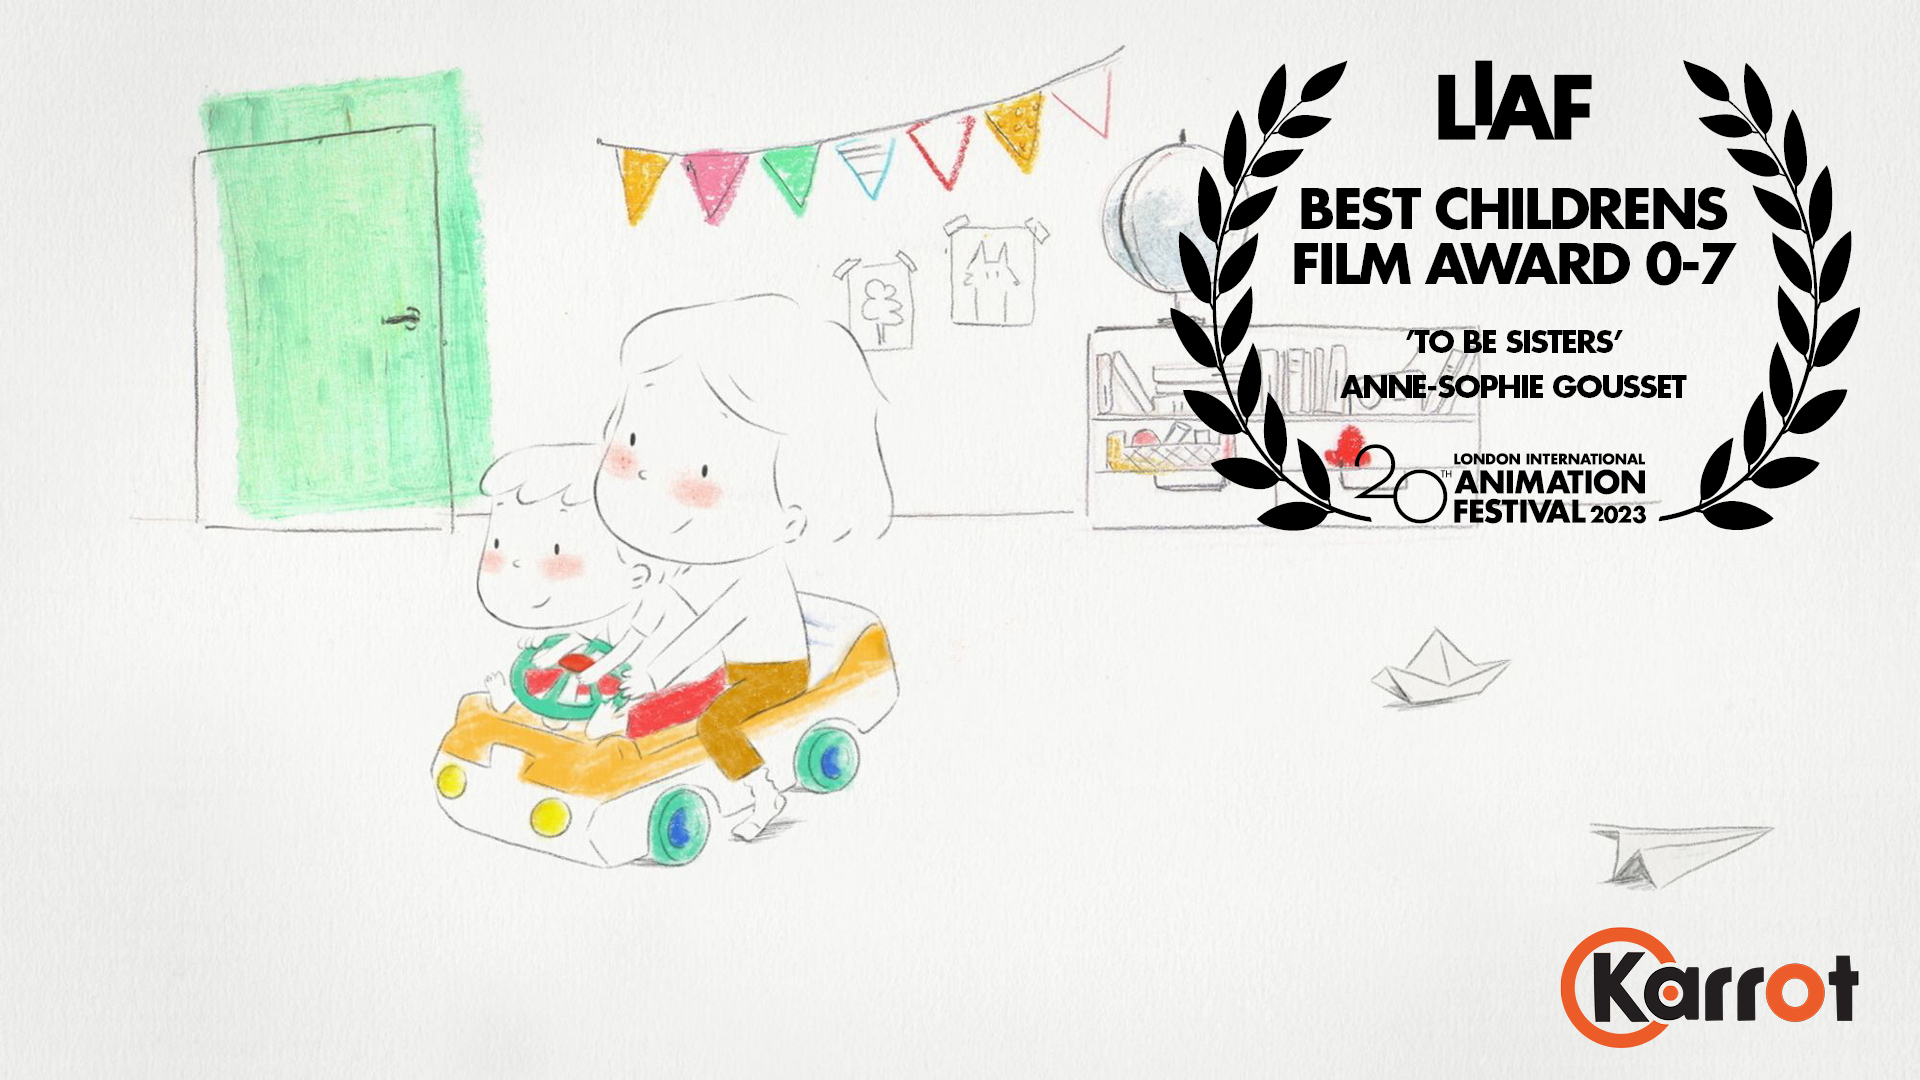 LIAF, London International Animation Festival, Best Childrens Film Award 0-7 year-olds, To Be Sisters, Anne-Sophie Gousset